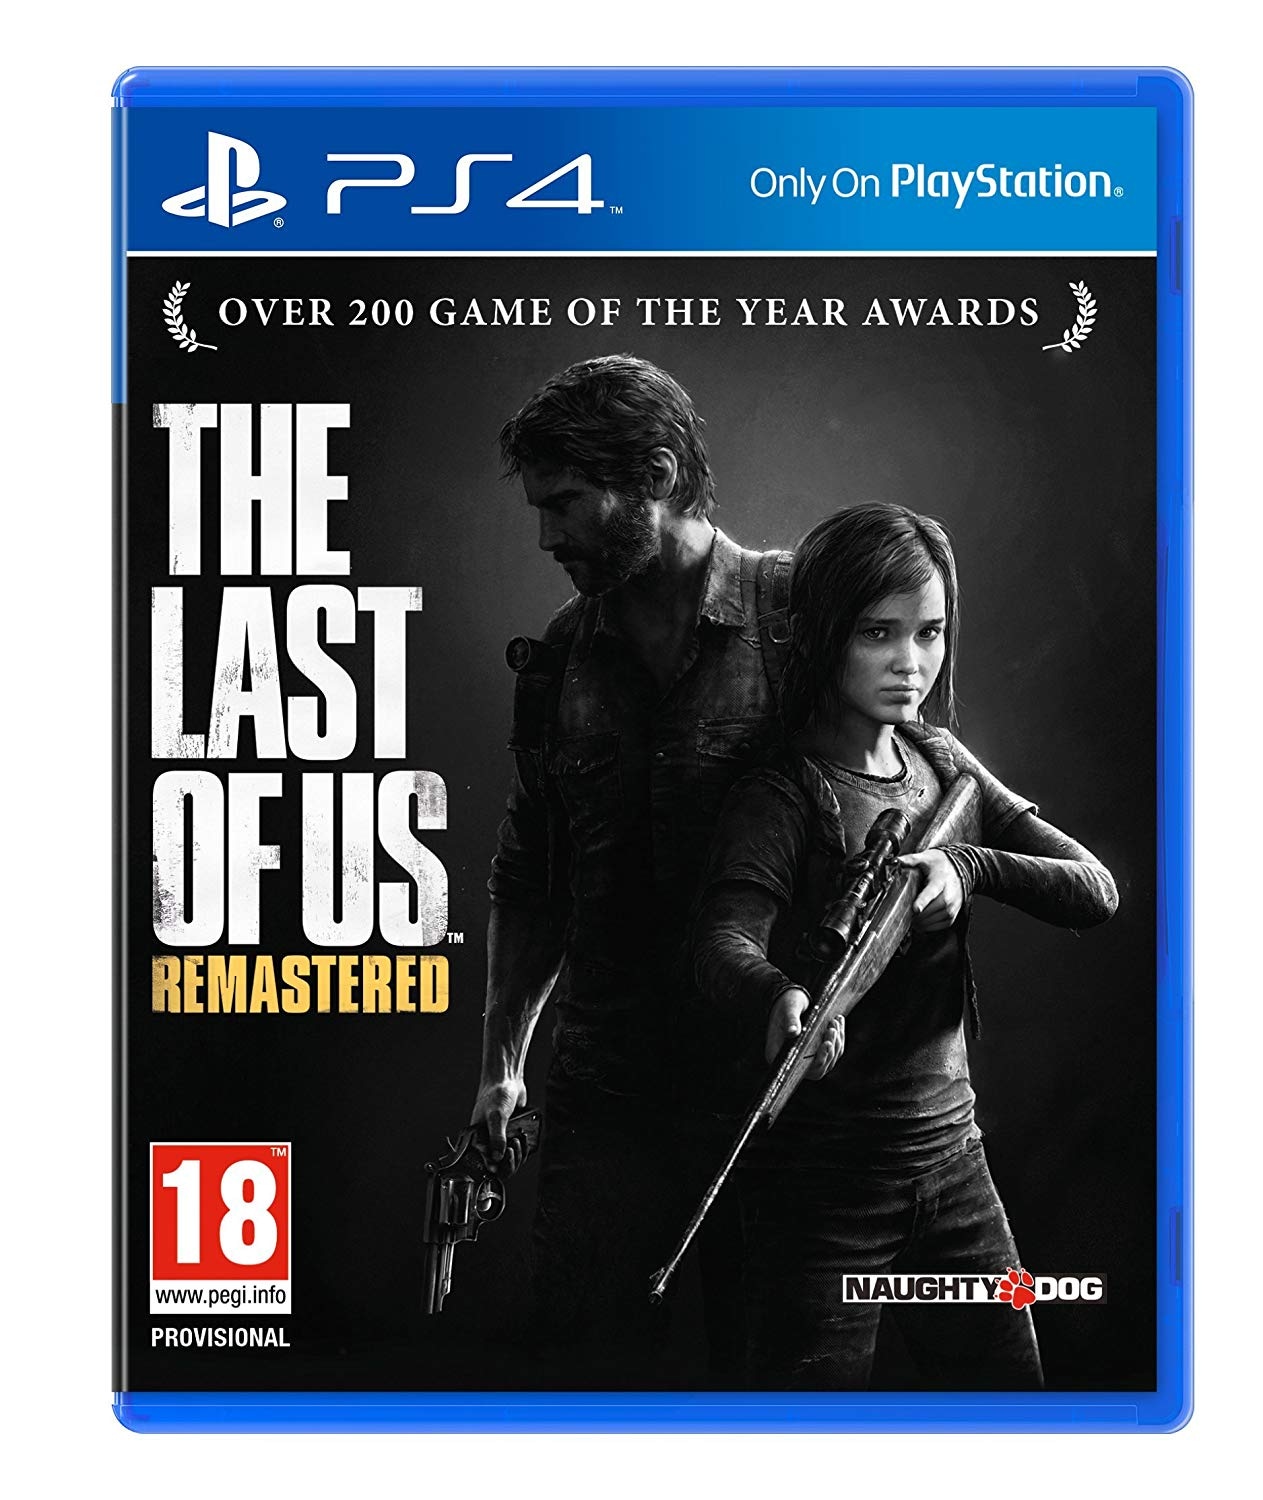 PS4 THE LAST OF US REMASTERED - R2 Physical - 1